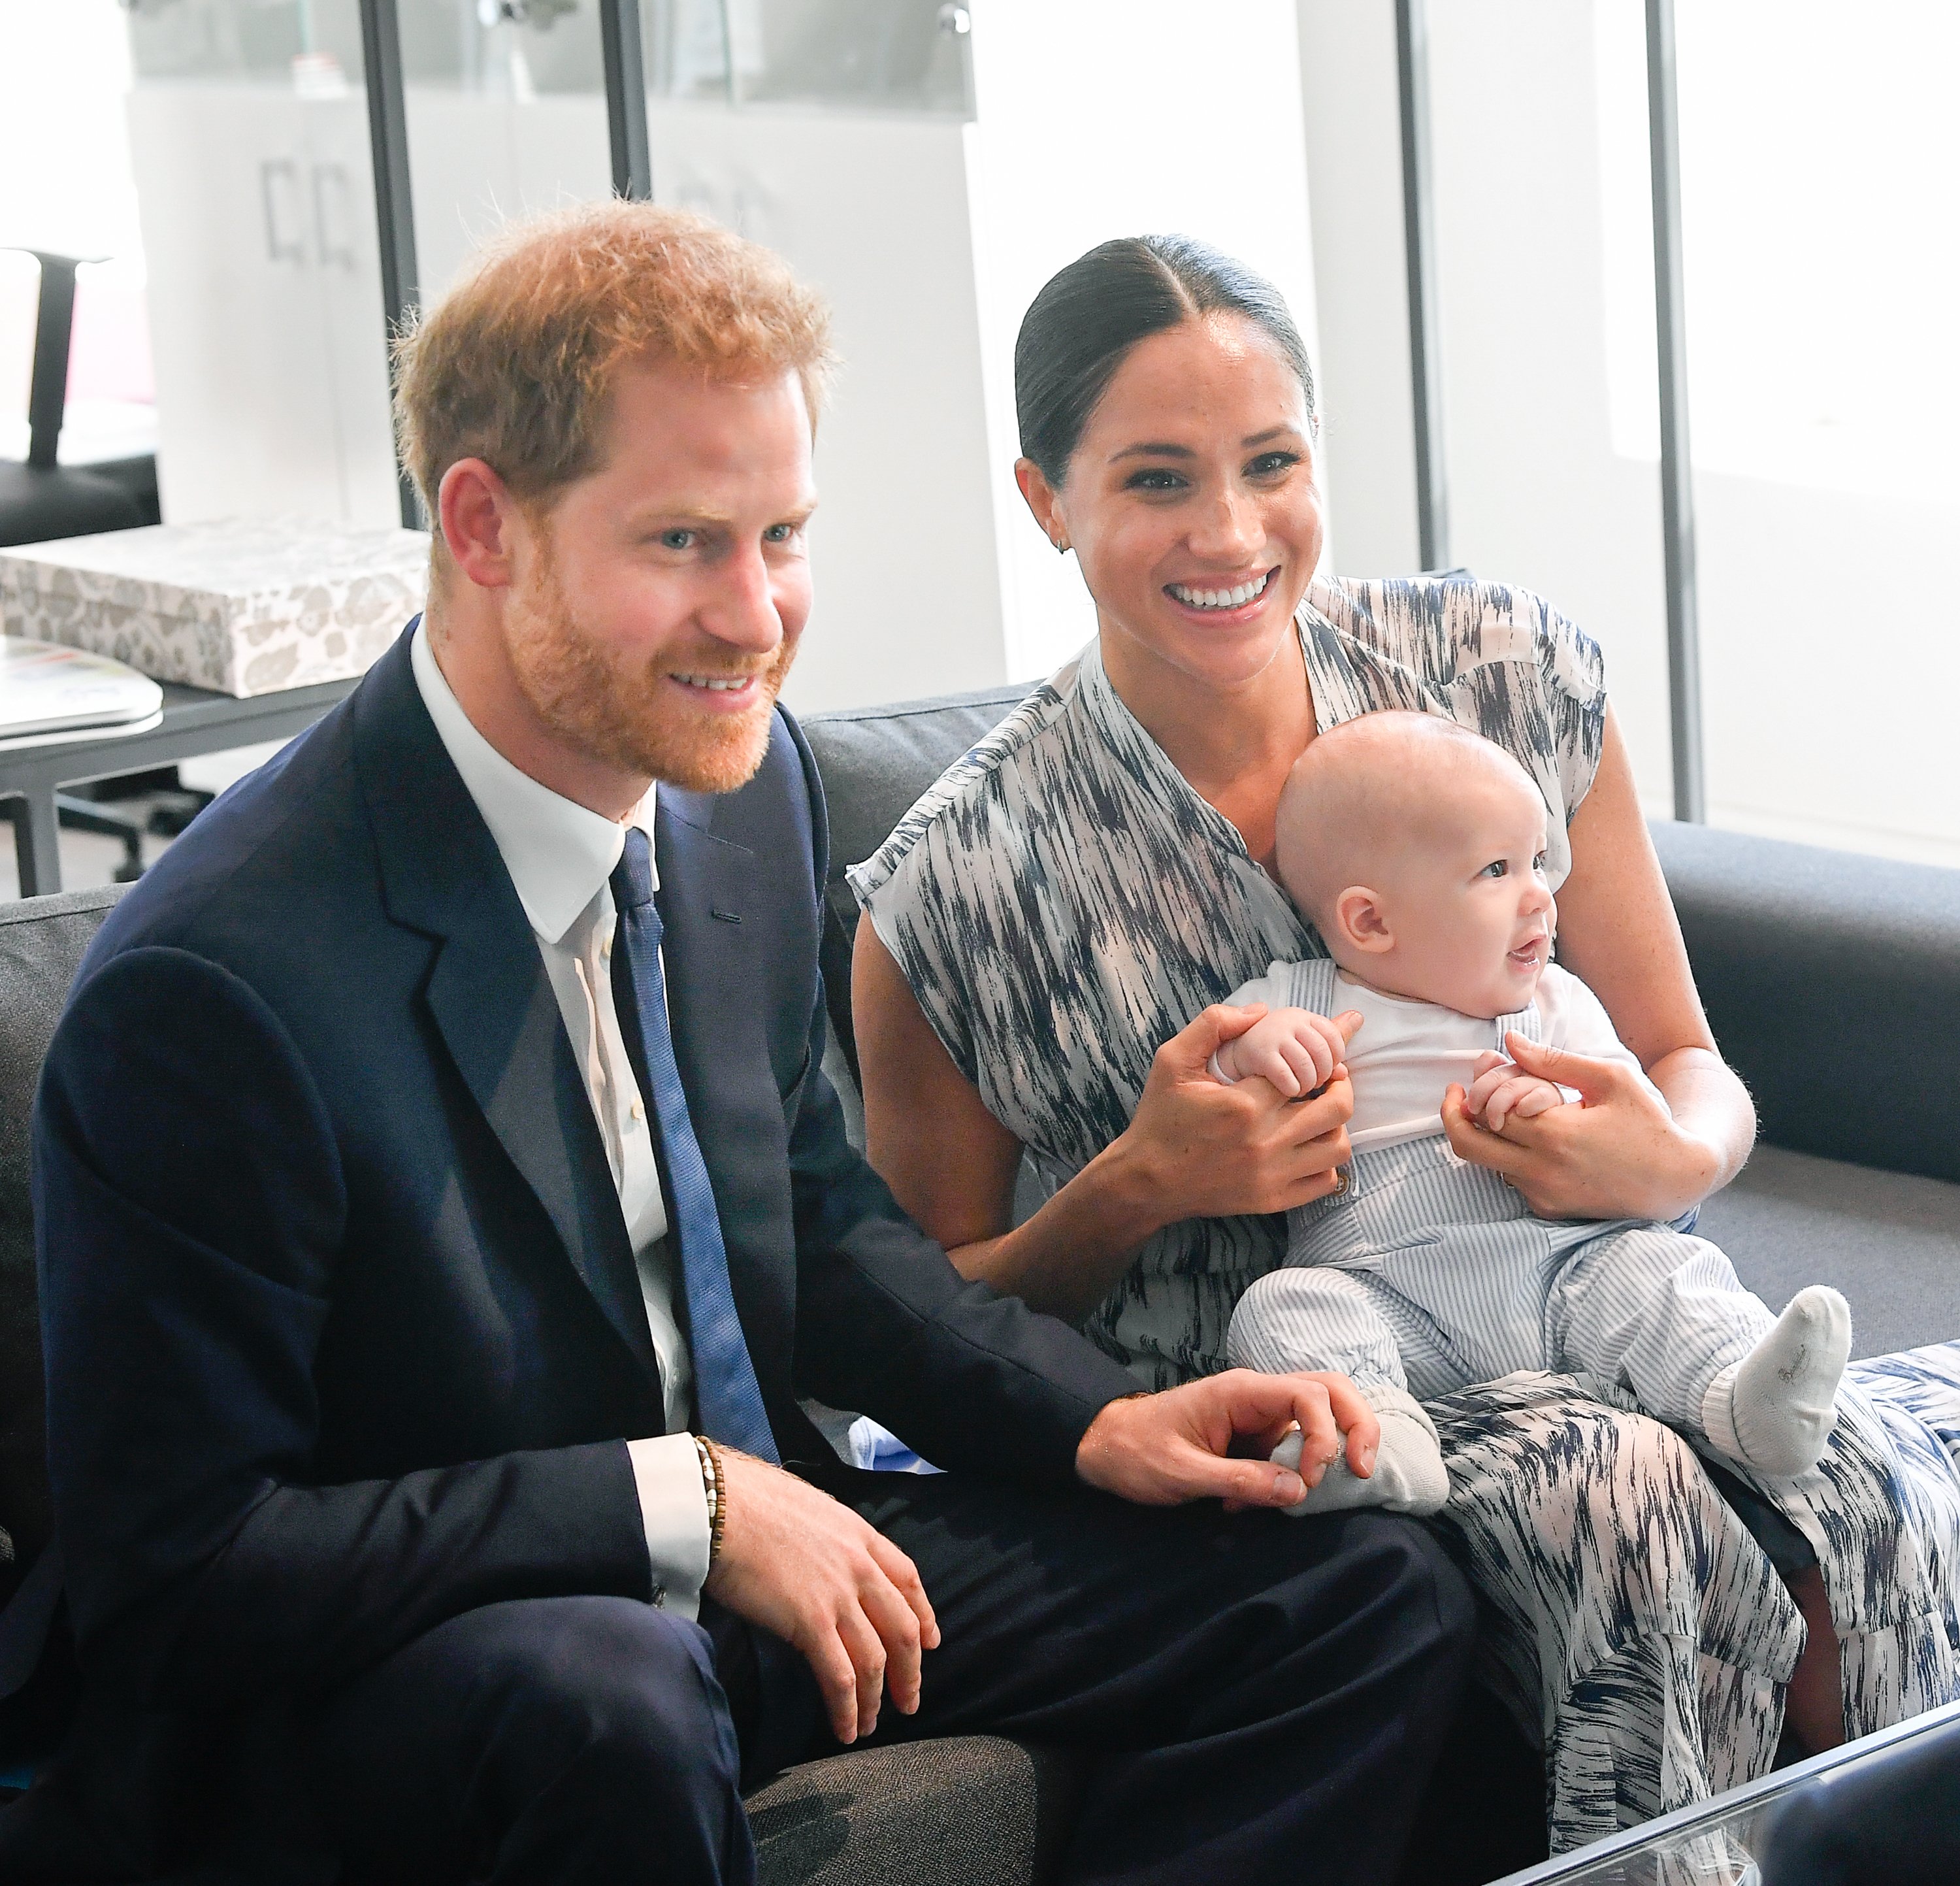 Prince Harry and Meghan Markle in Cape Town, South Africa in 2019. | Source: Getty Images